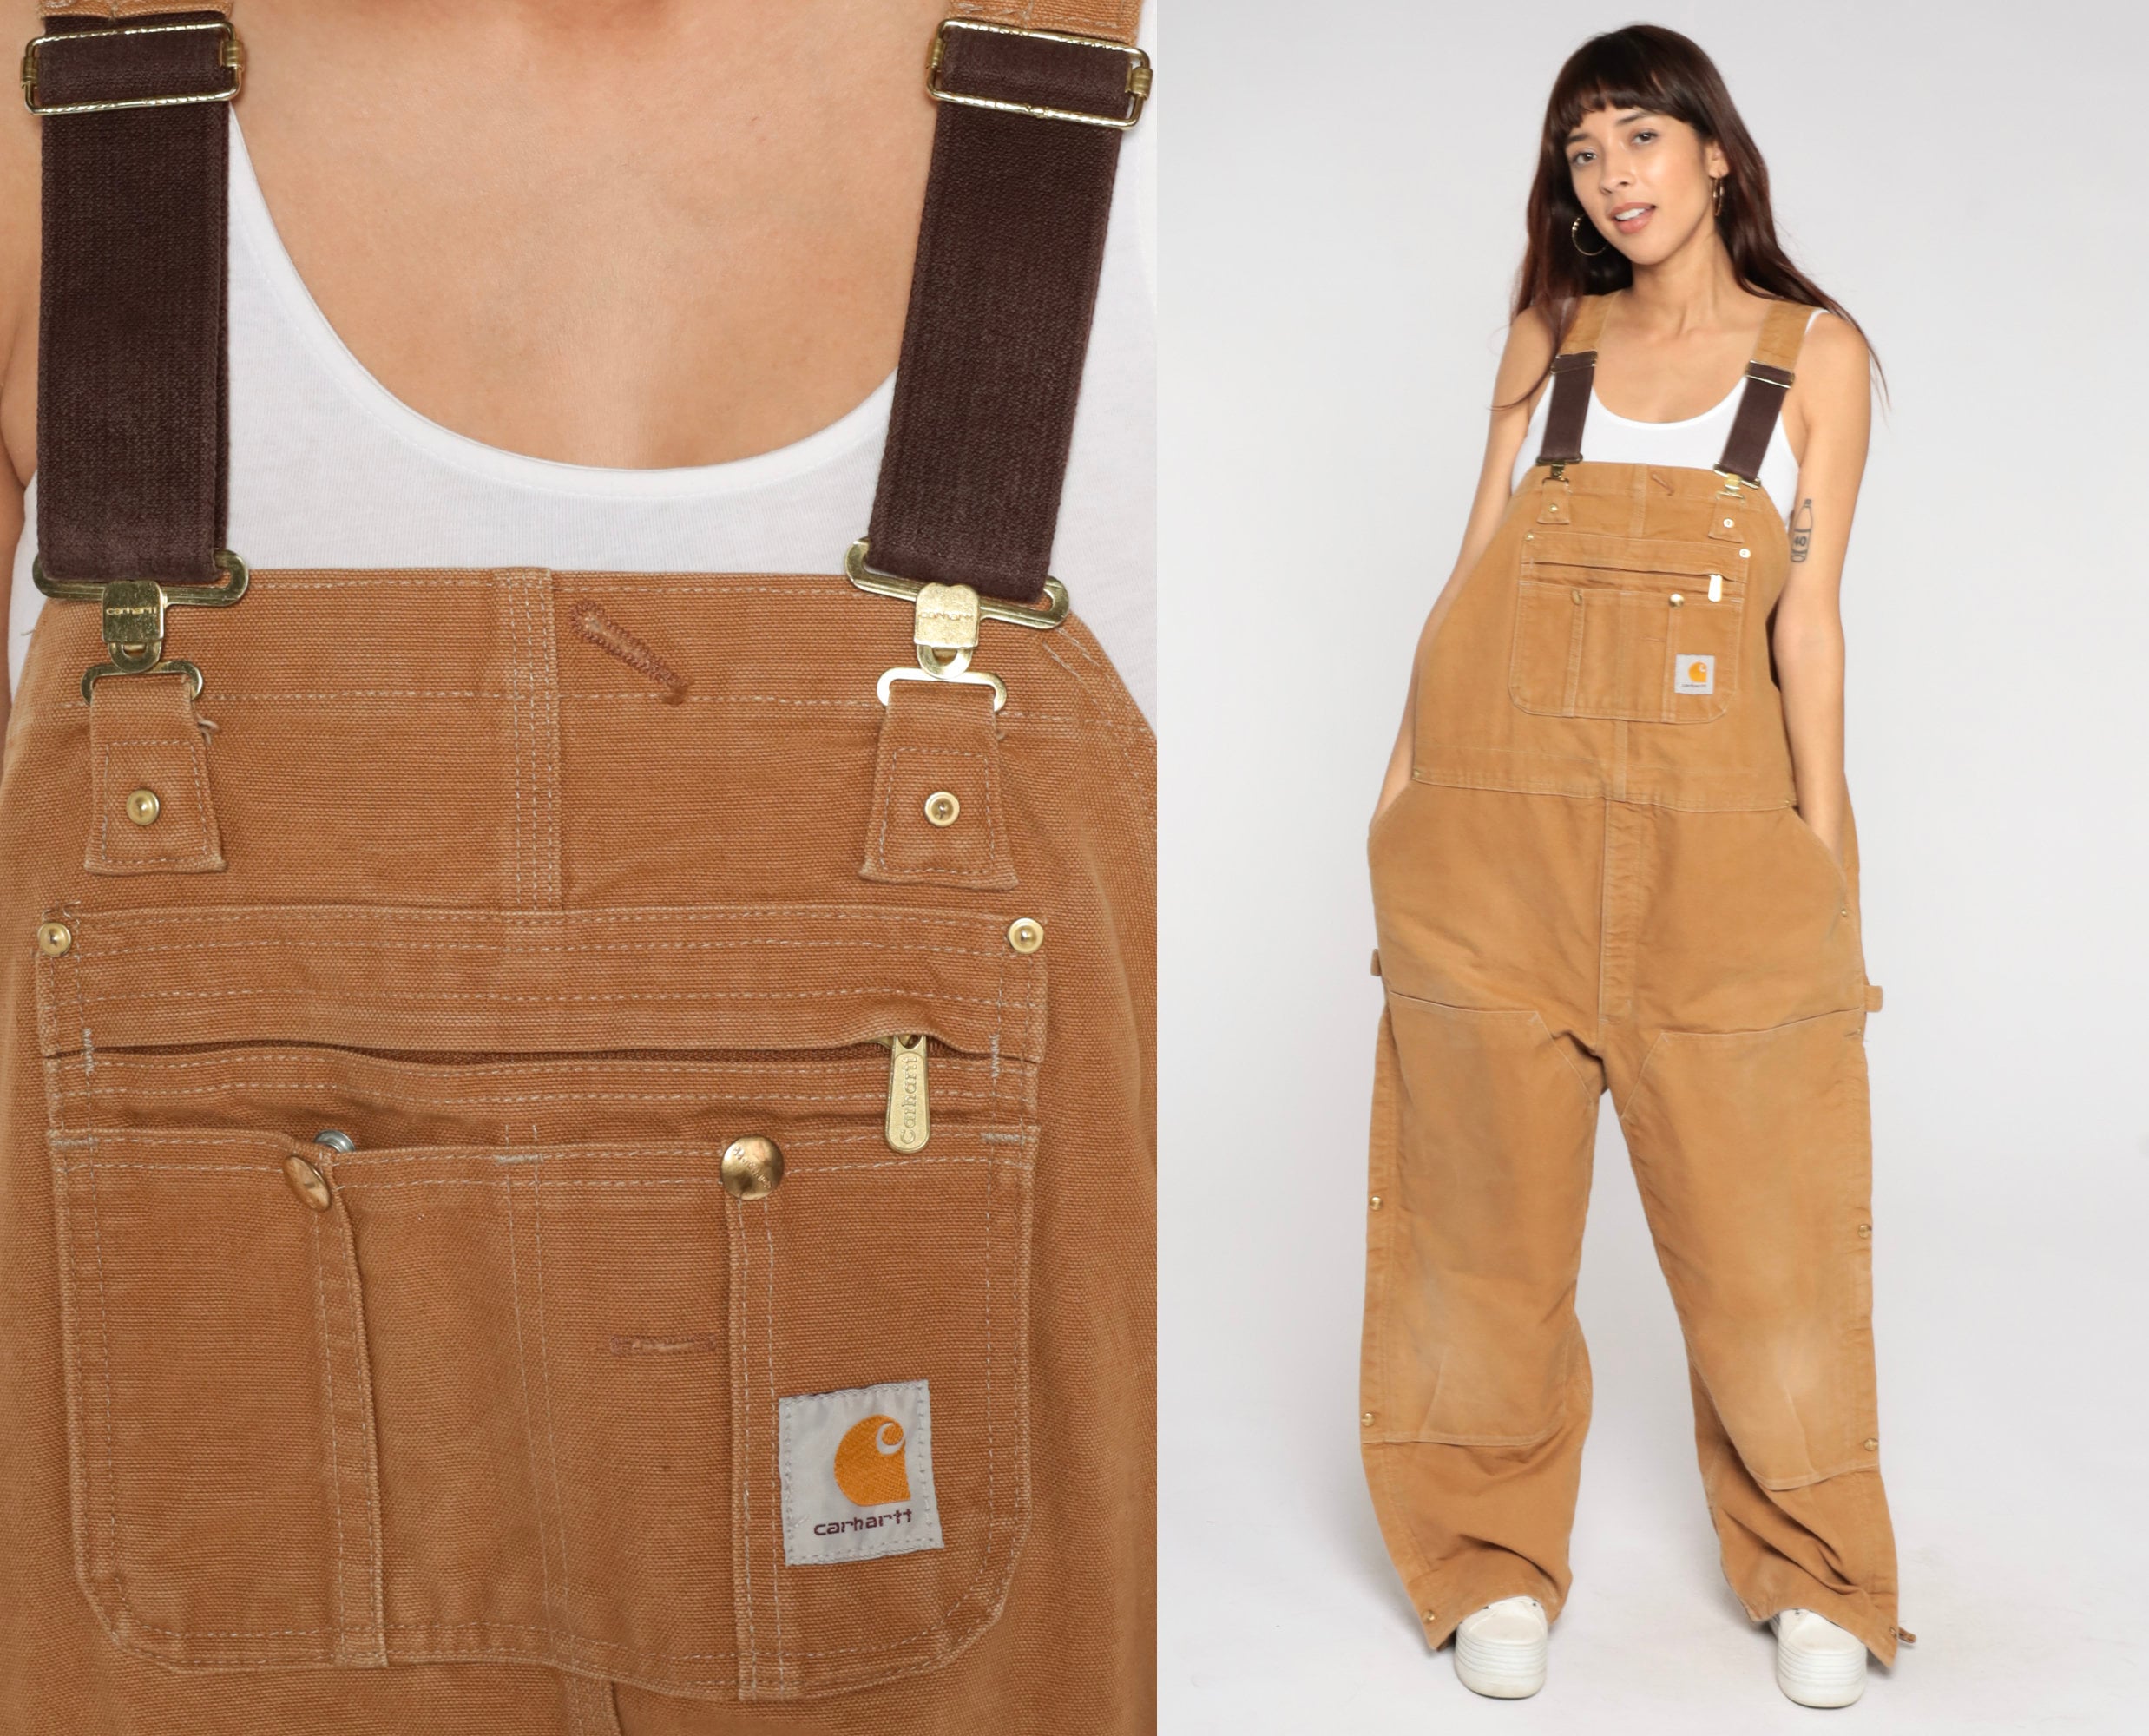 Carhartt Bib Overalls Men 46 X 30 Brown Vintage USA Insulated Quilt Canvas  FLAWS